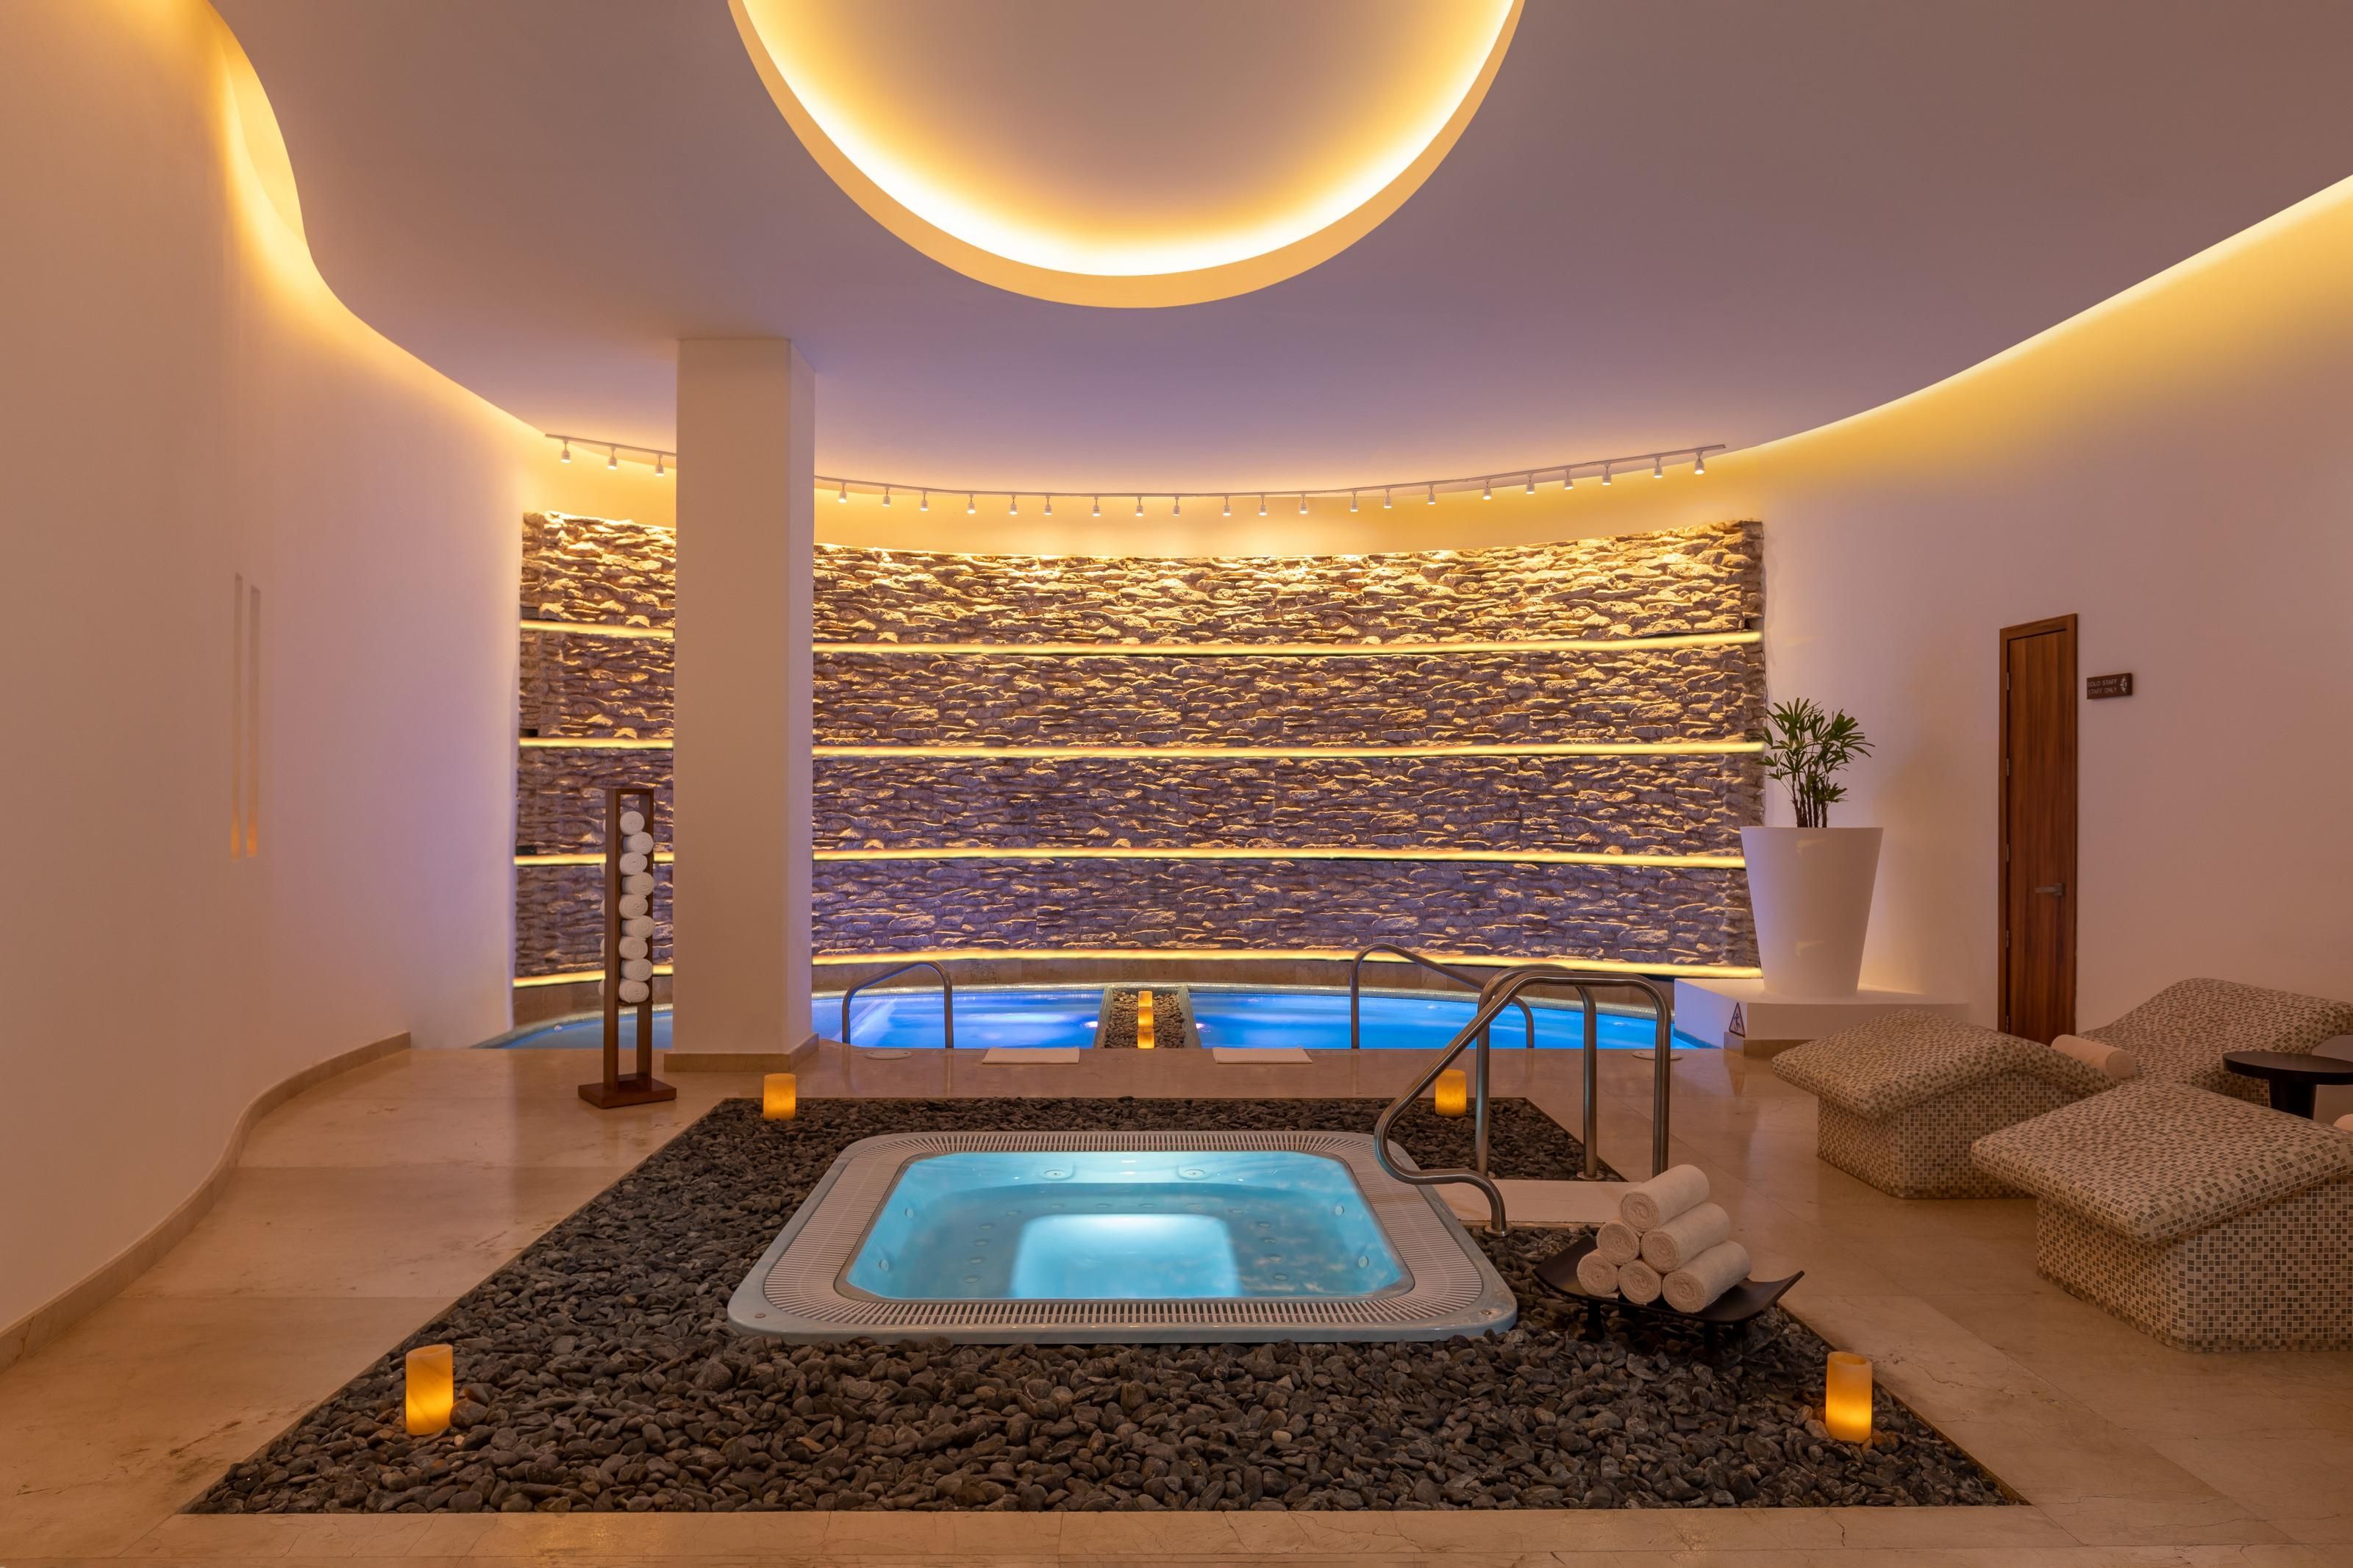 Private Spa hydrotherapy details